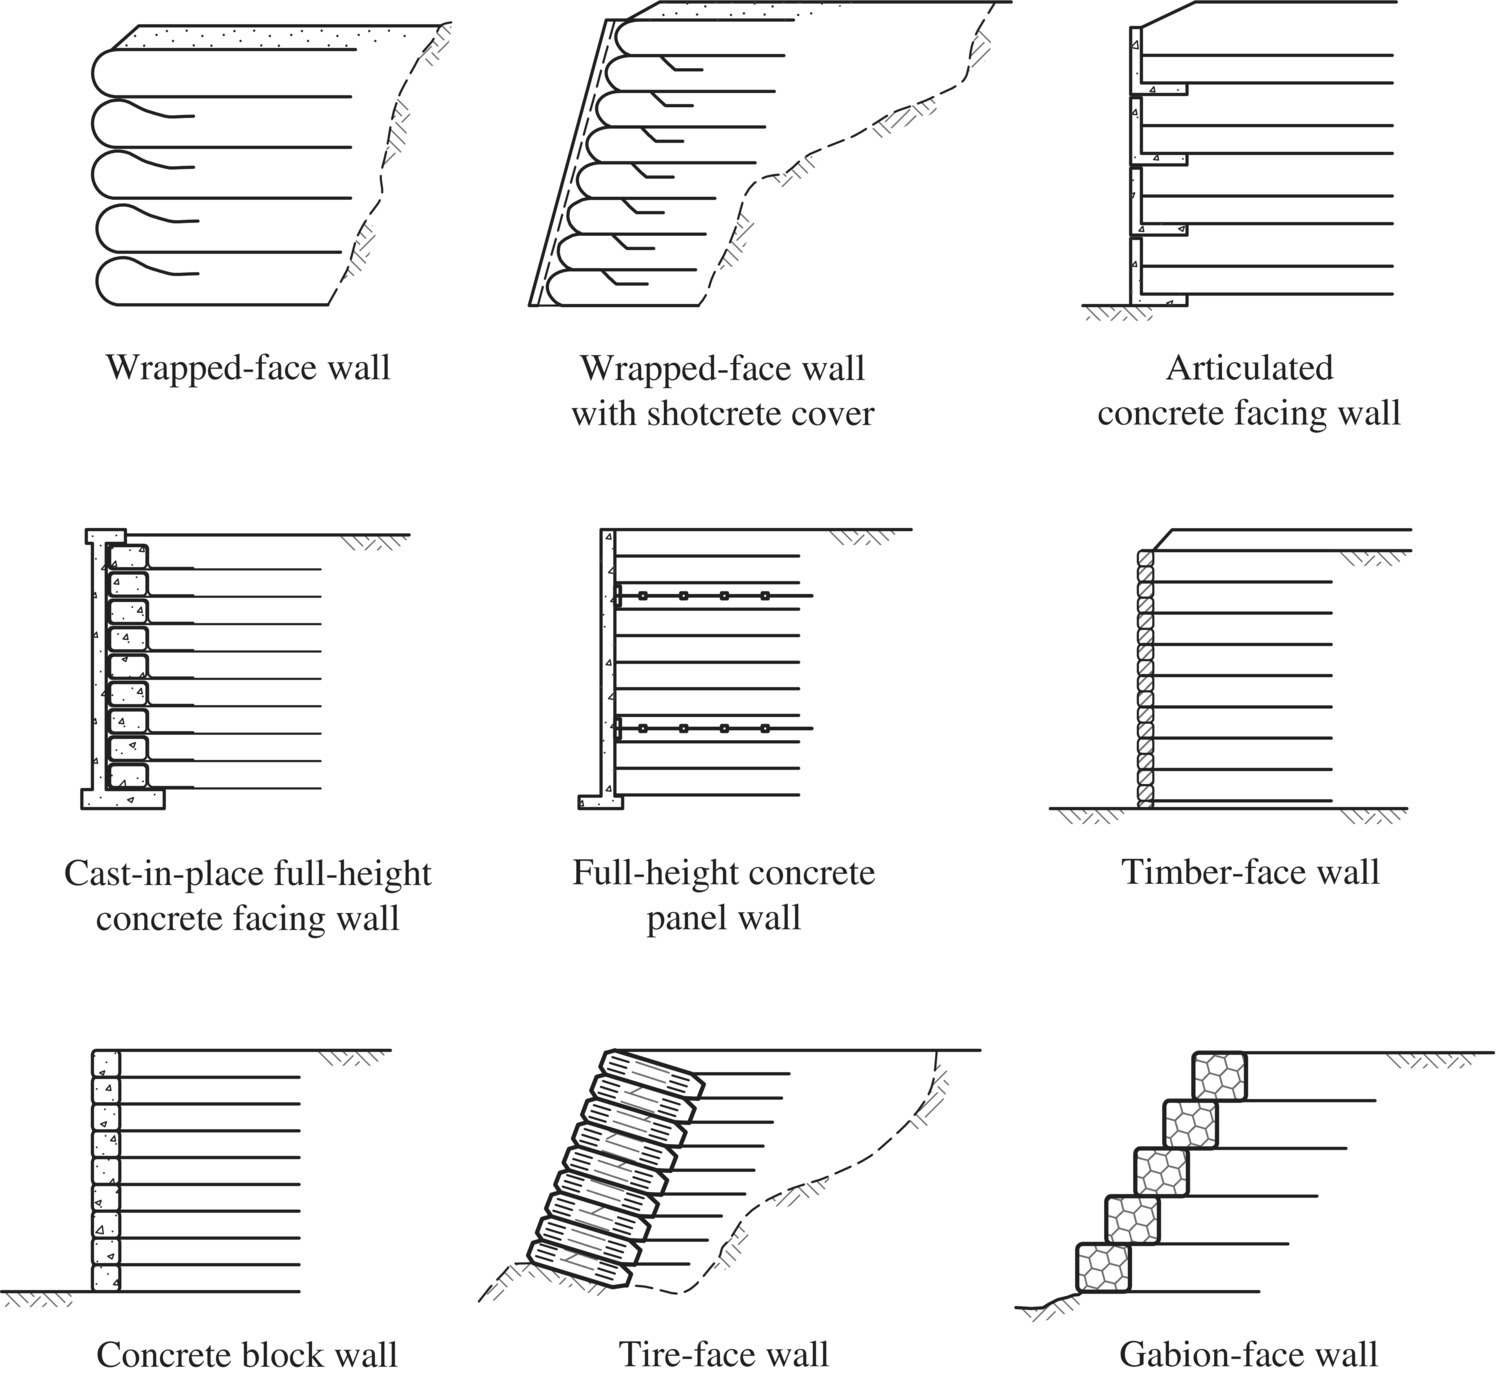 Illustrations of common types of GRS walls: wrapped-face wall, wrapped-face wall with shotcrete cover, articulated concrete facing wall, cast-in-place full-height concrete facing wall, timber-face wall, etc.